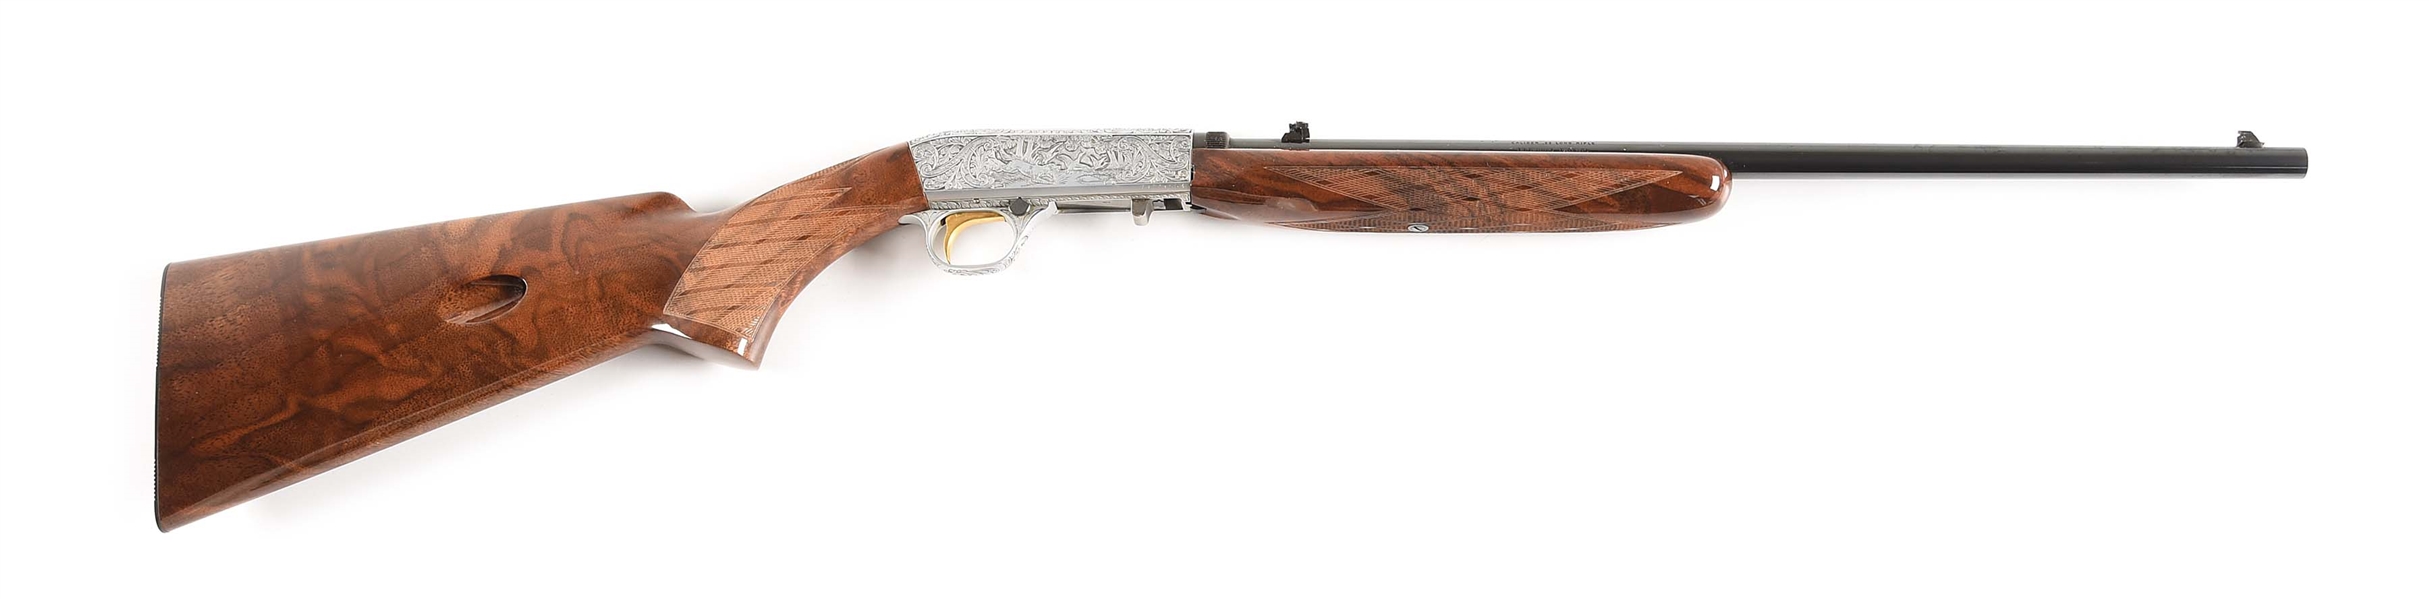 (M) BROWNING GRADE III .22 LR SEMI-AUTOMATIC RIFLE A. MARECHAL ENGRAVED WITH BOX, SIGNED BY MARECHAL.